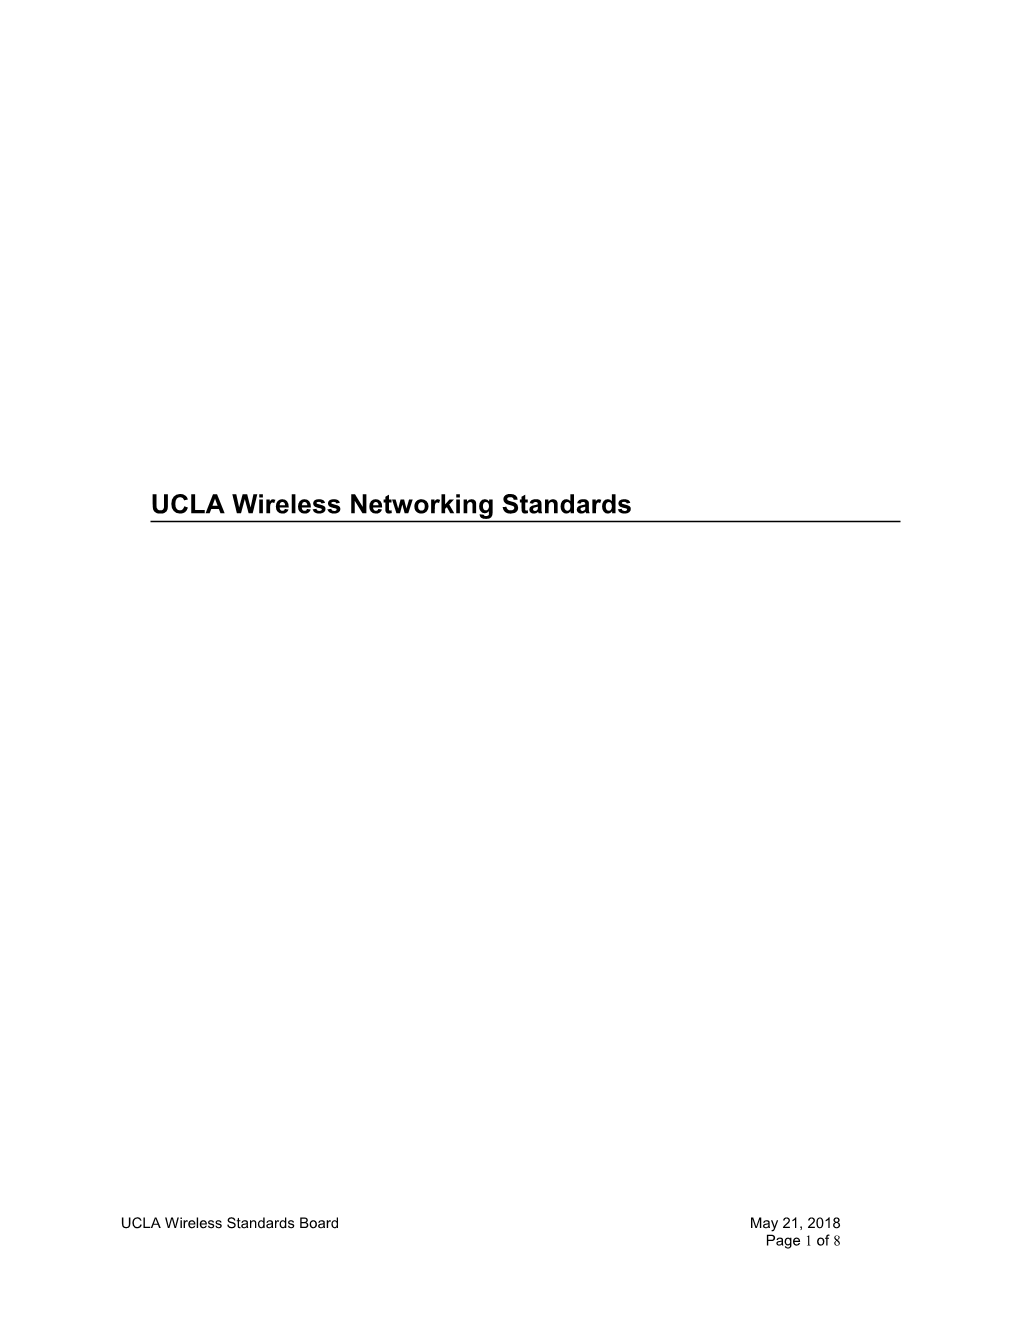 UCLA Wireless Networking Standards and Guidelines